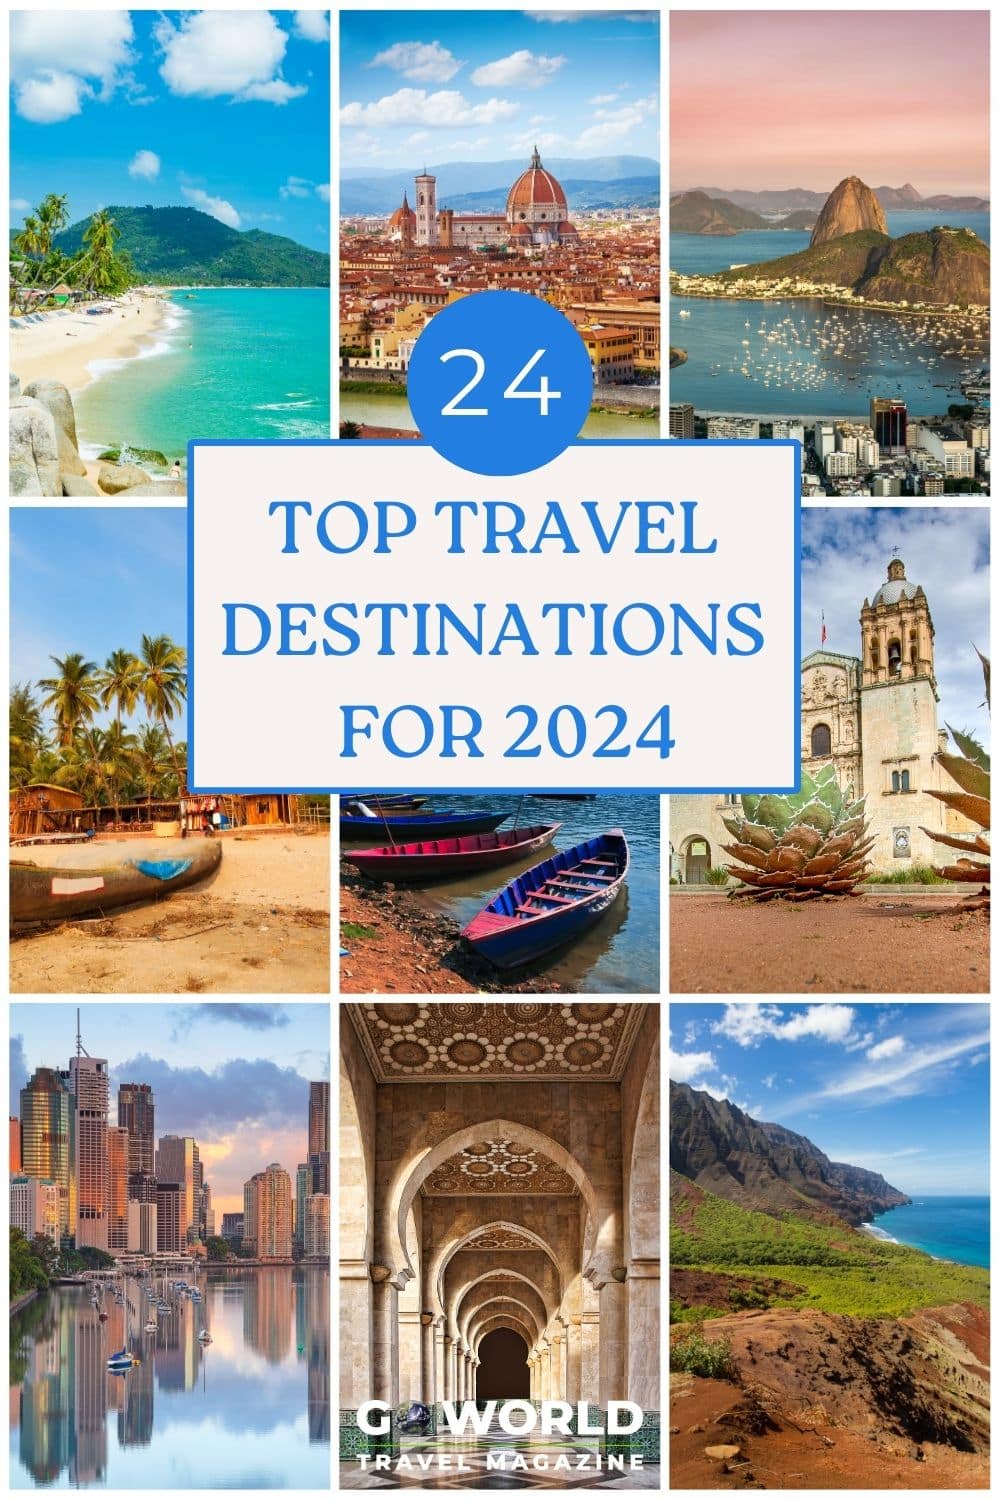 Plan your travel in 2024 with this exciting list of destinations in Europe, Mexico, Asia and beyond, covering top sights, food and activities.